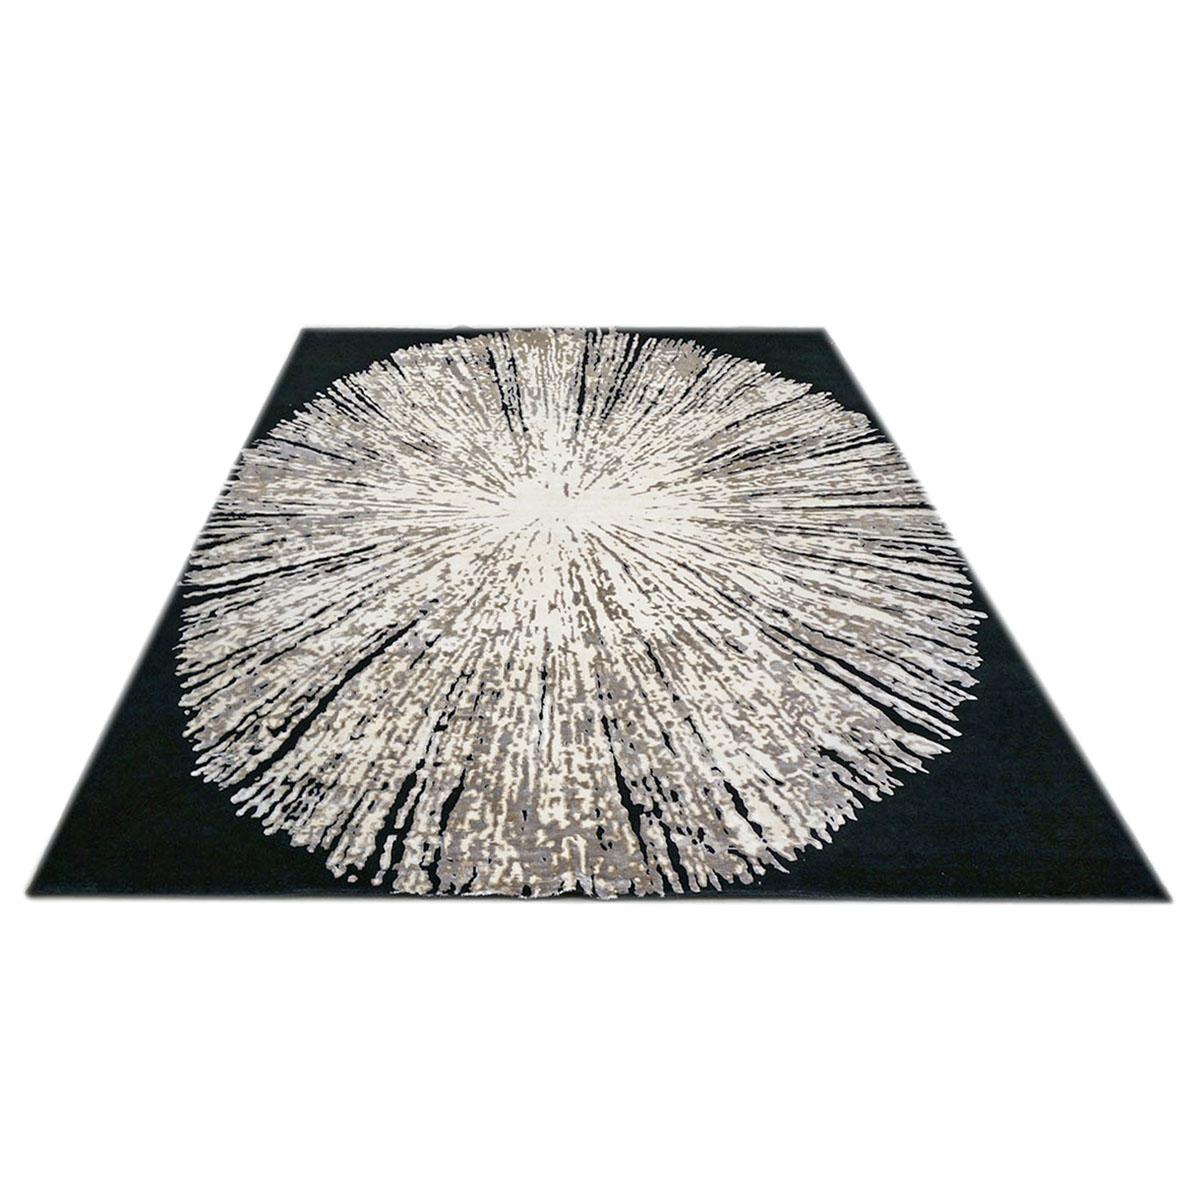 Ashly Fine Rugs presents a New modern inspired wool & silk 10x14 black, white, & grey handmade area rug with lustrous shiny fibers and a thick durable pile. This gorgeous collection has been designed by our in-house designer and was 100% handmade by